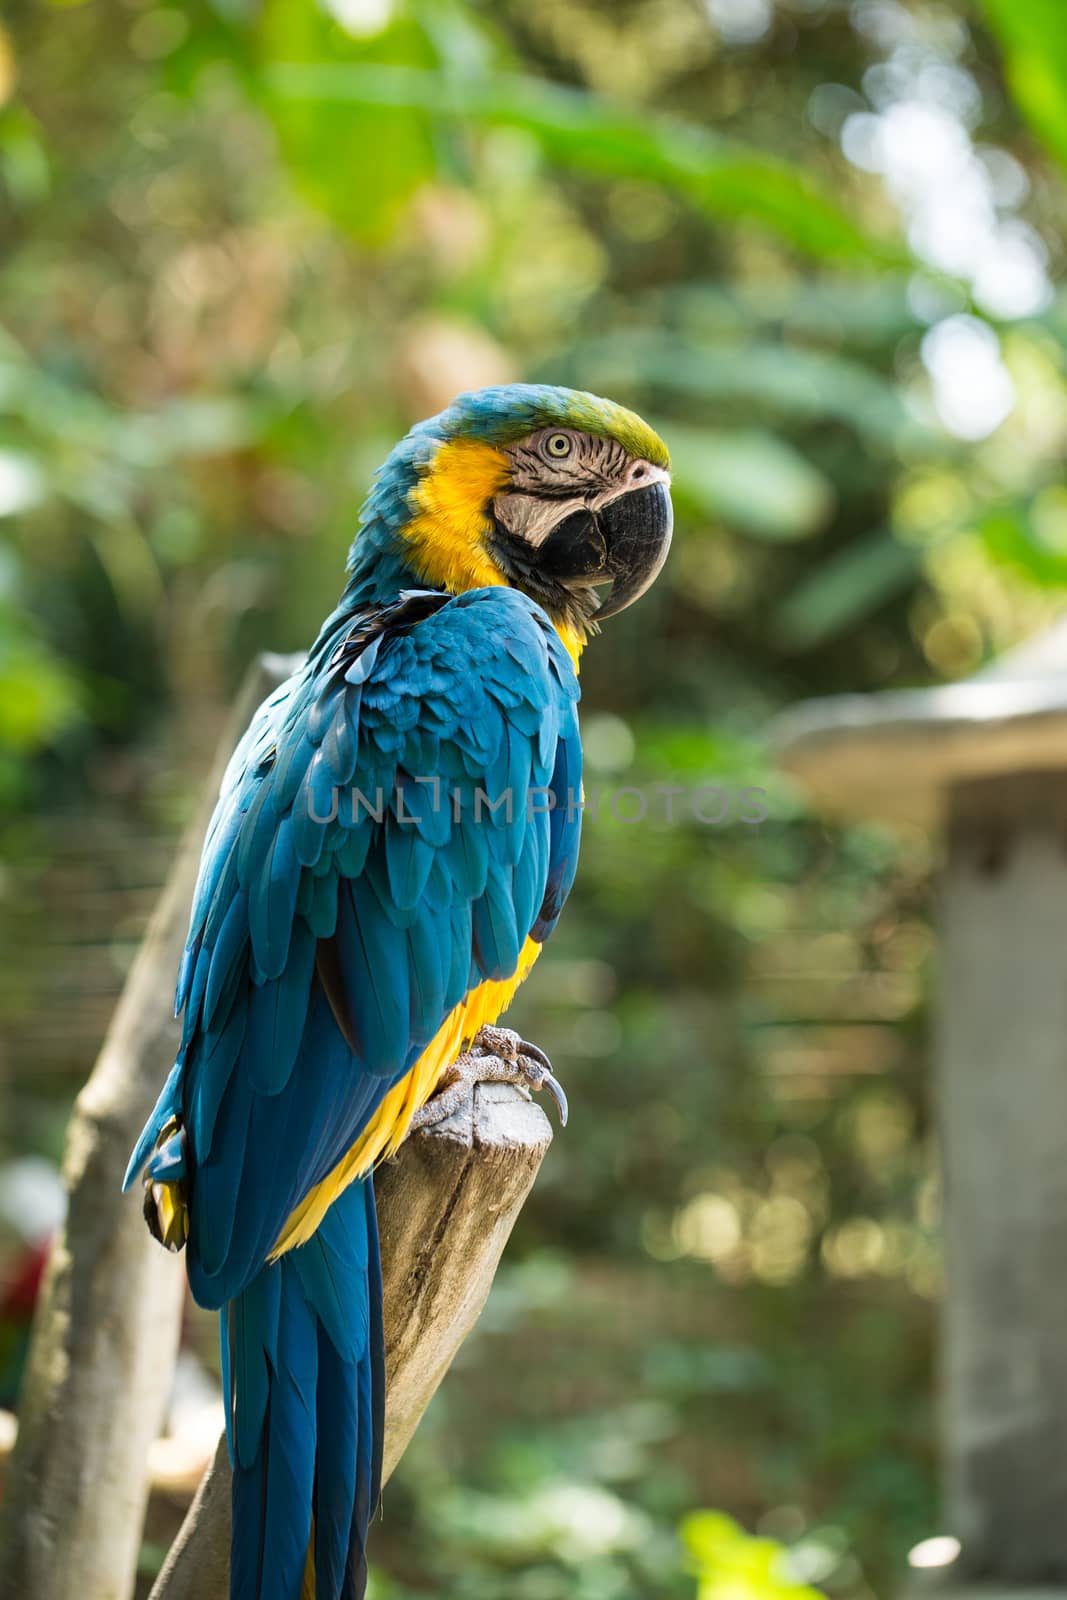 Parrot in Bali Island Indonesia - nature background